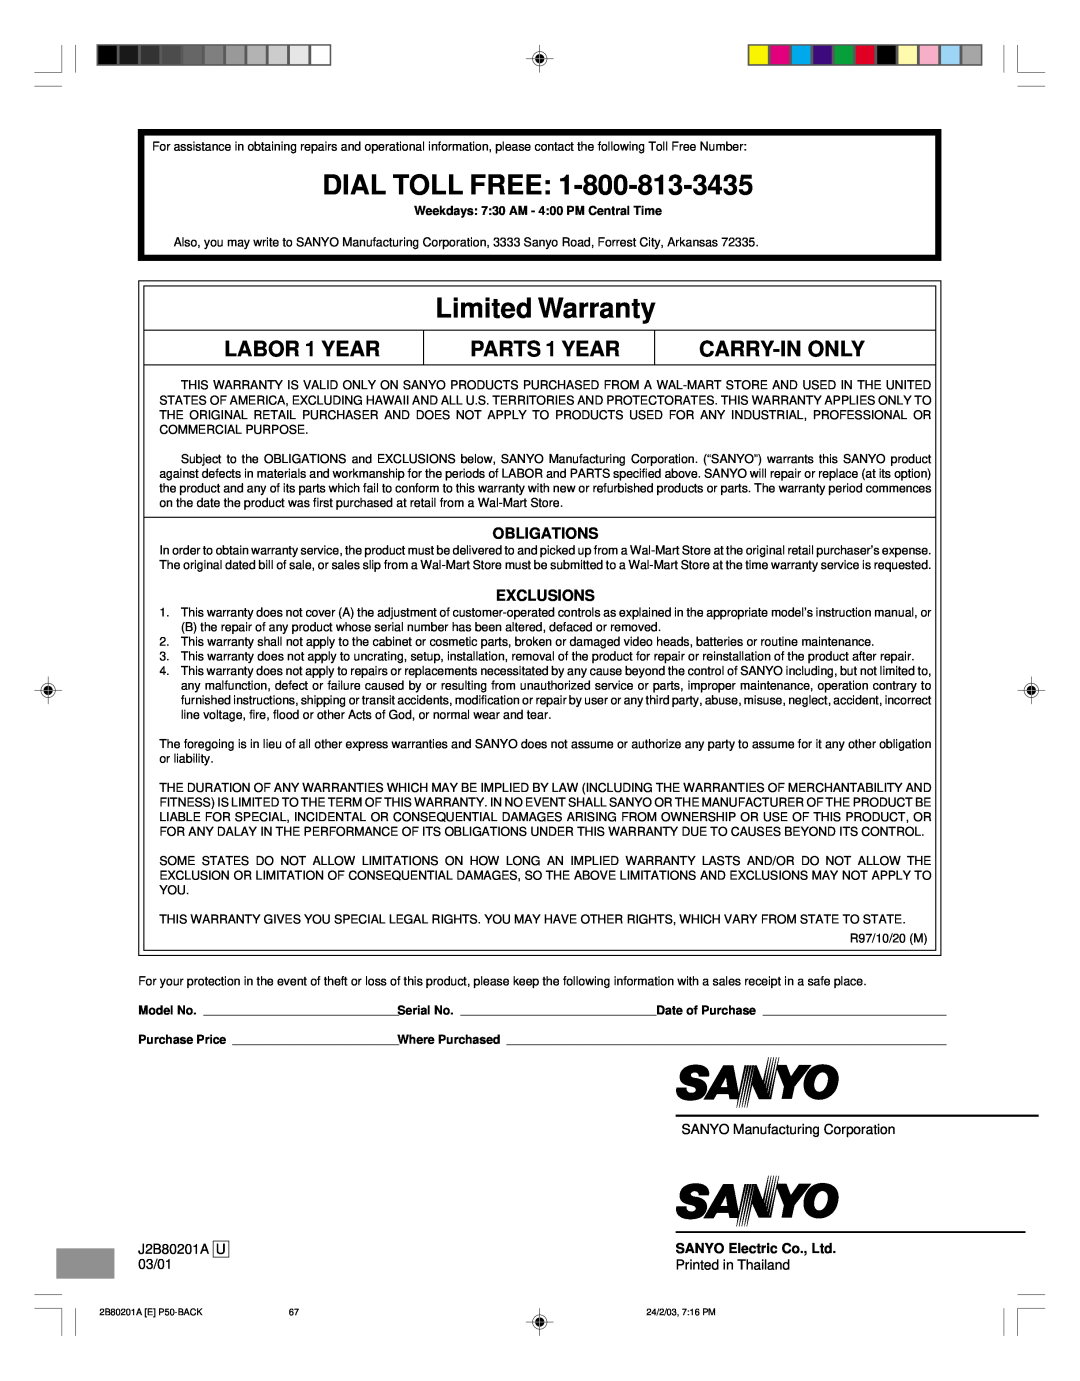 Sanyo DWM-3500 Dial Toll Free, Limited Warranty, LABOR 1 YEAR, PARTS 1 YEAR, Carry-Inonly, Obligations, Exclusions 